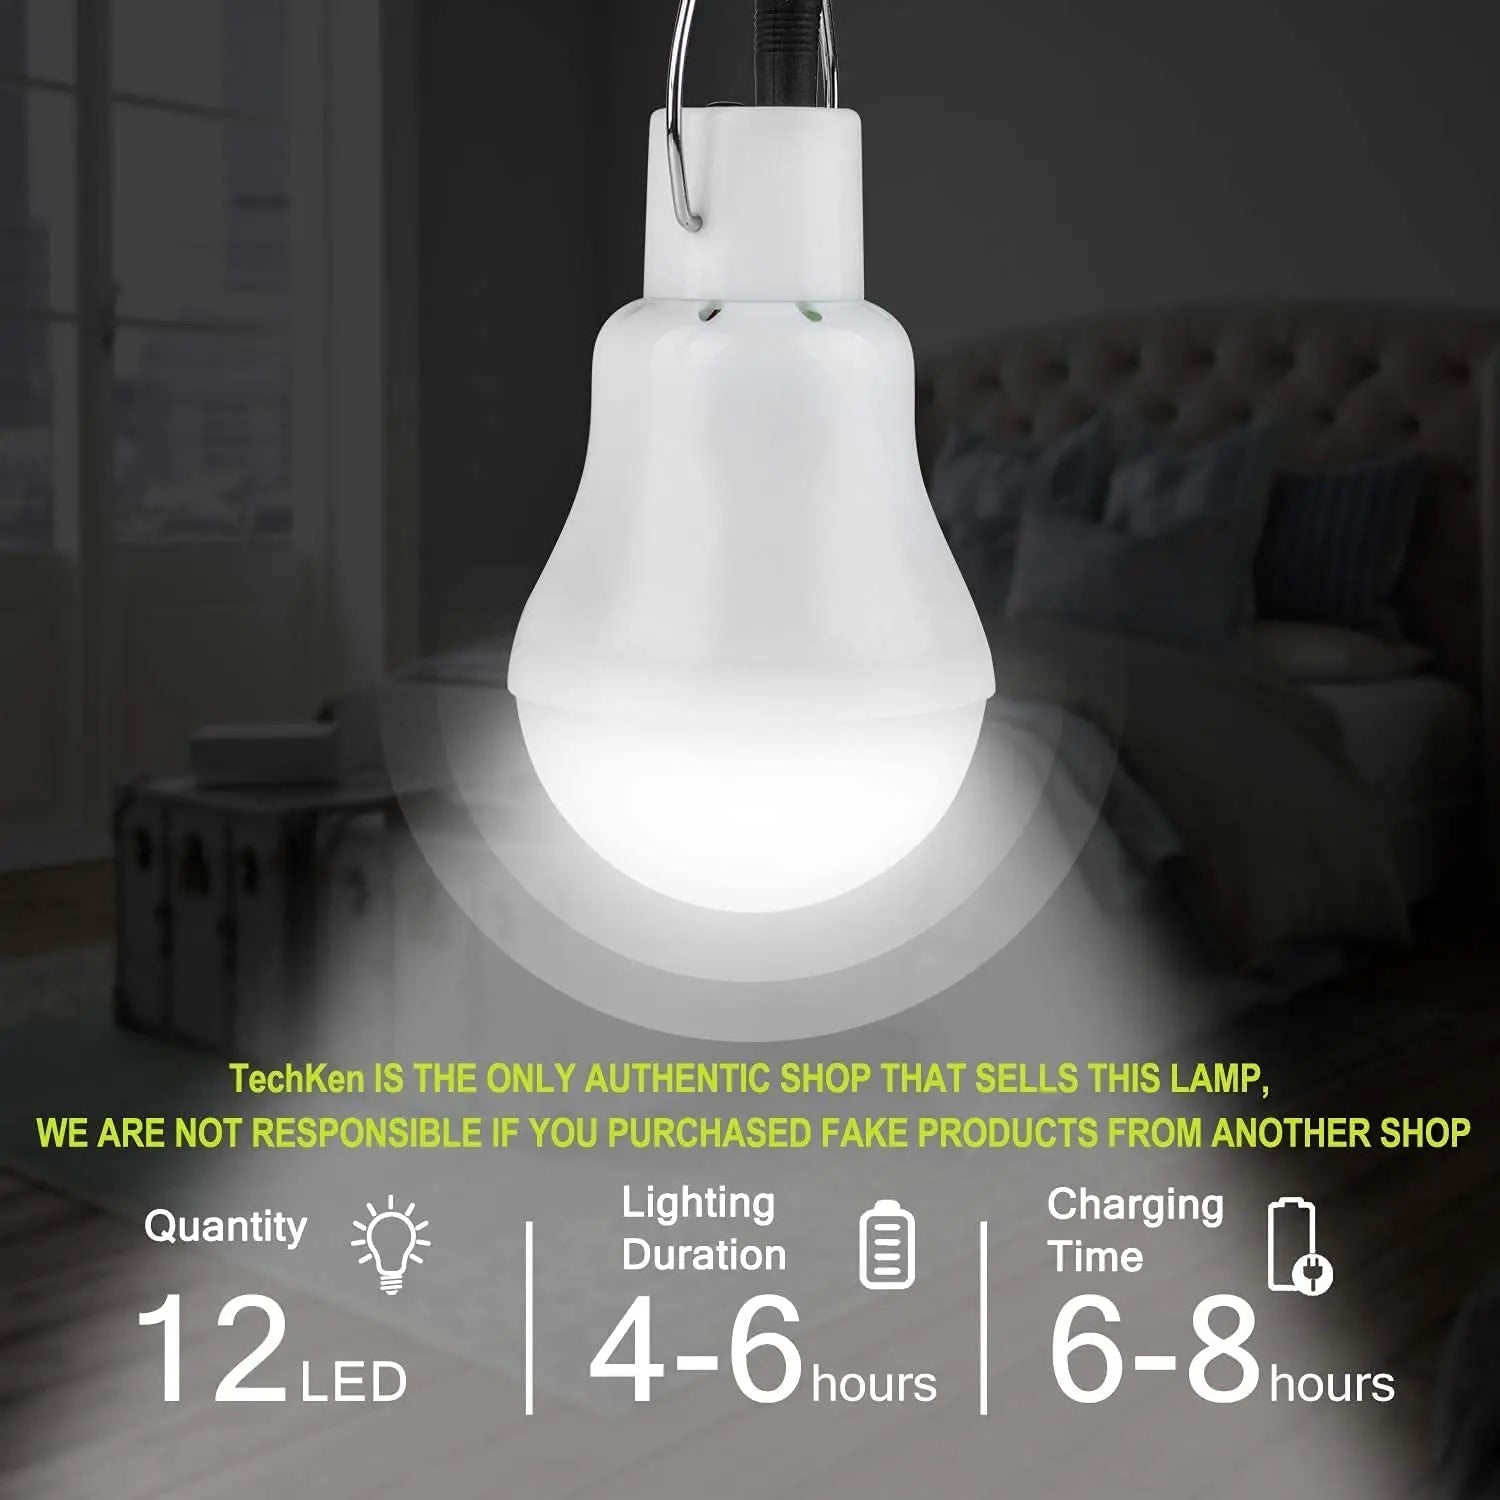 LED Solar Bulb Light, Authentic lamp with 12 LEDs, 4-6 hour charge, and 8 hour light duration; buy from authorized seller TechKen.